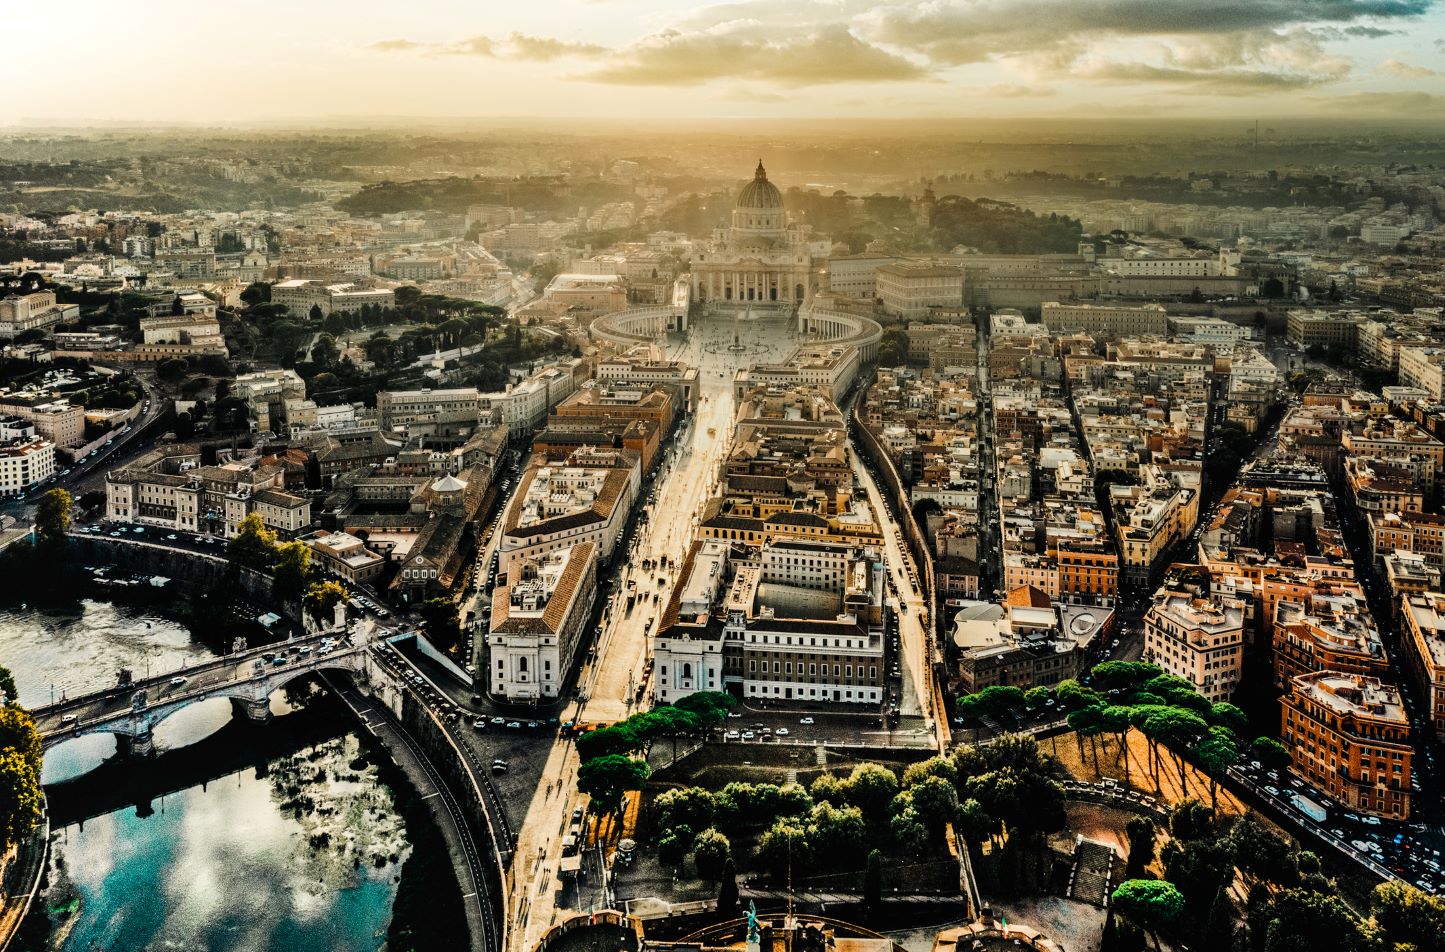 A sight of Rome from the drone